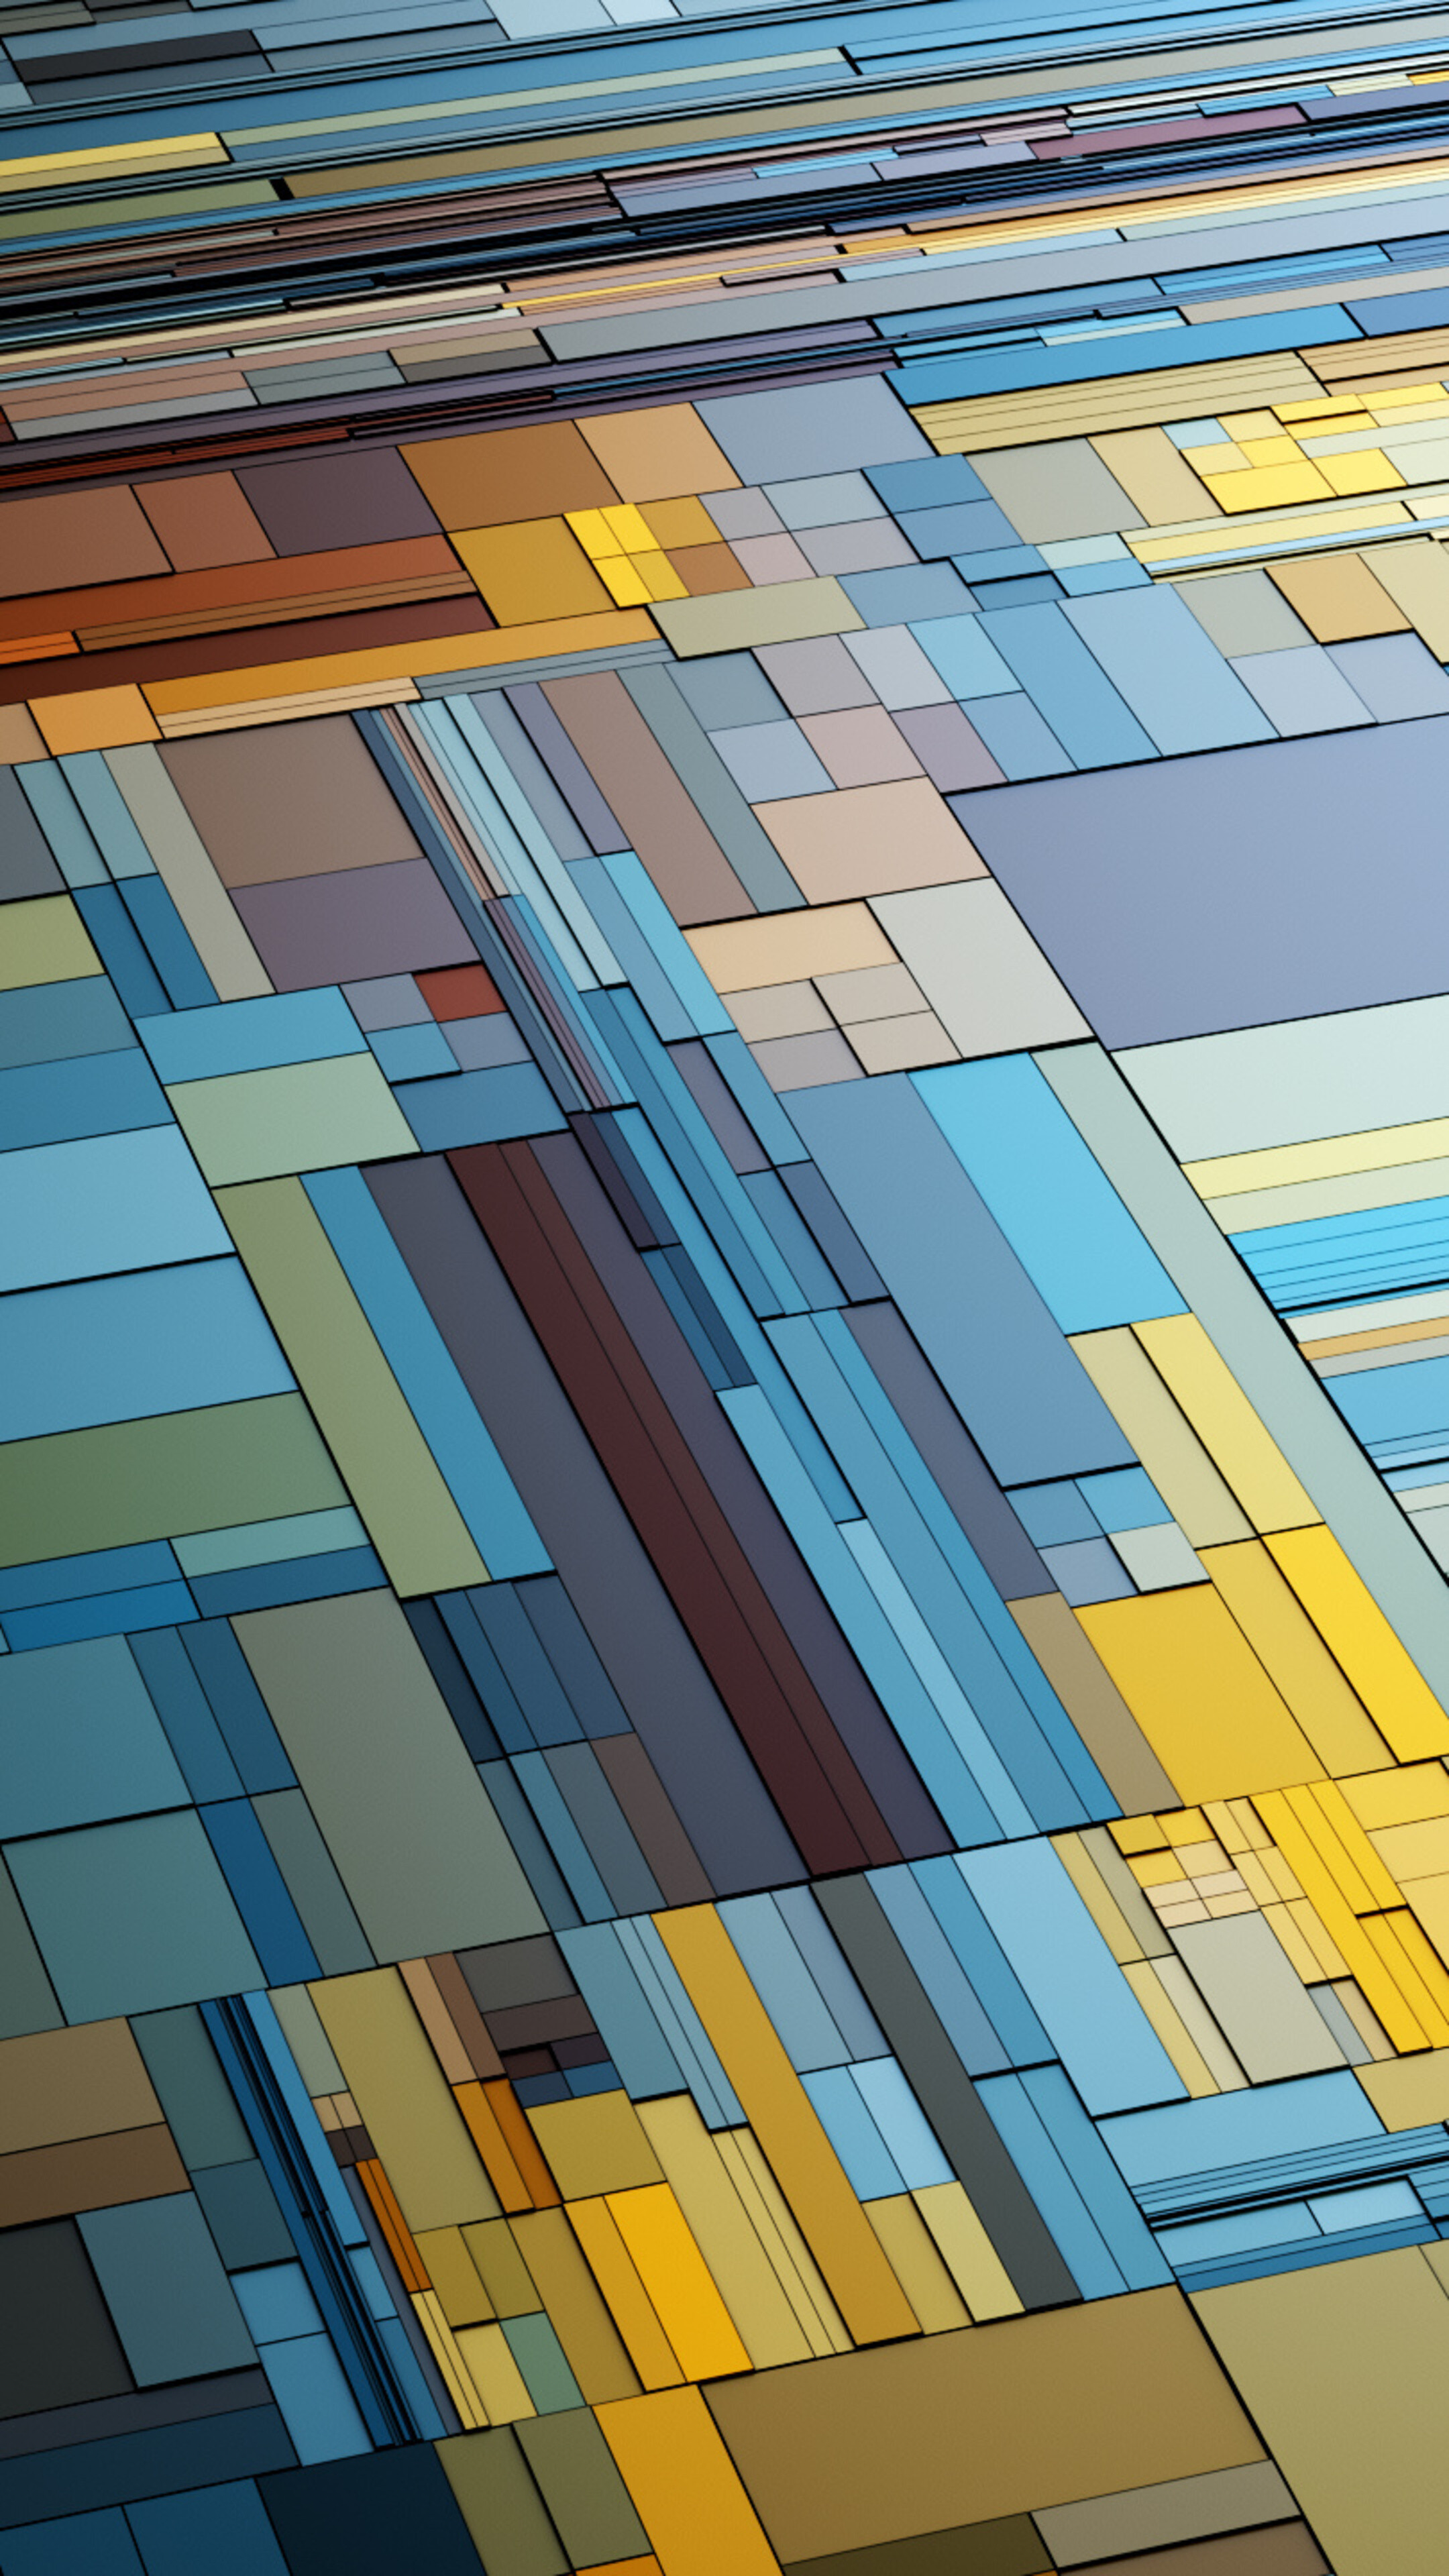 Geometric Abstract: Rectangles, Squares, Parallel lines, Acute angles. 2160x3840 4K Background.